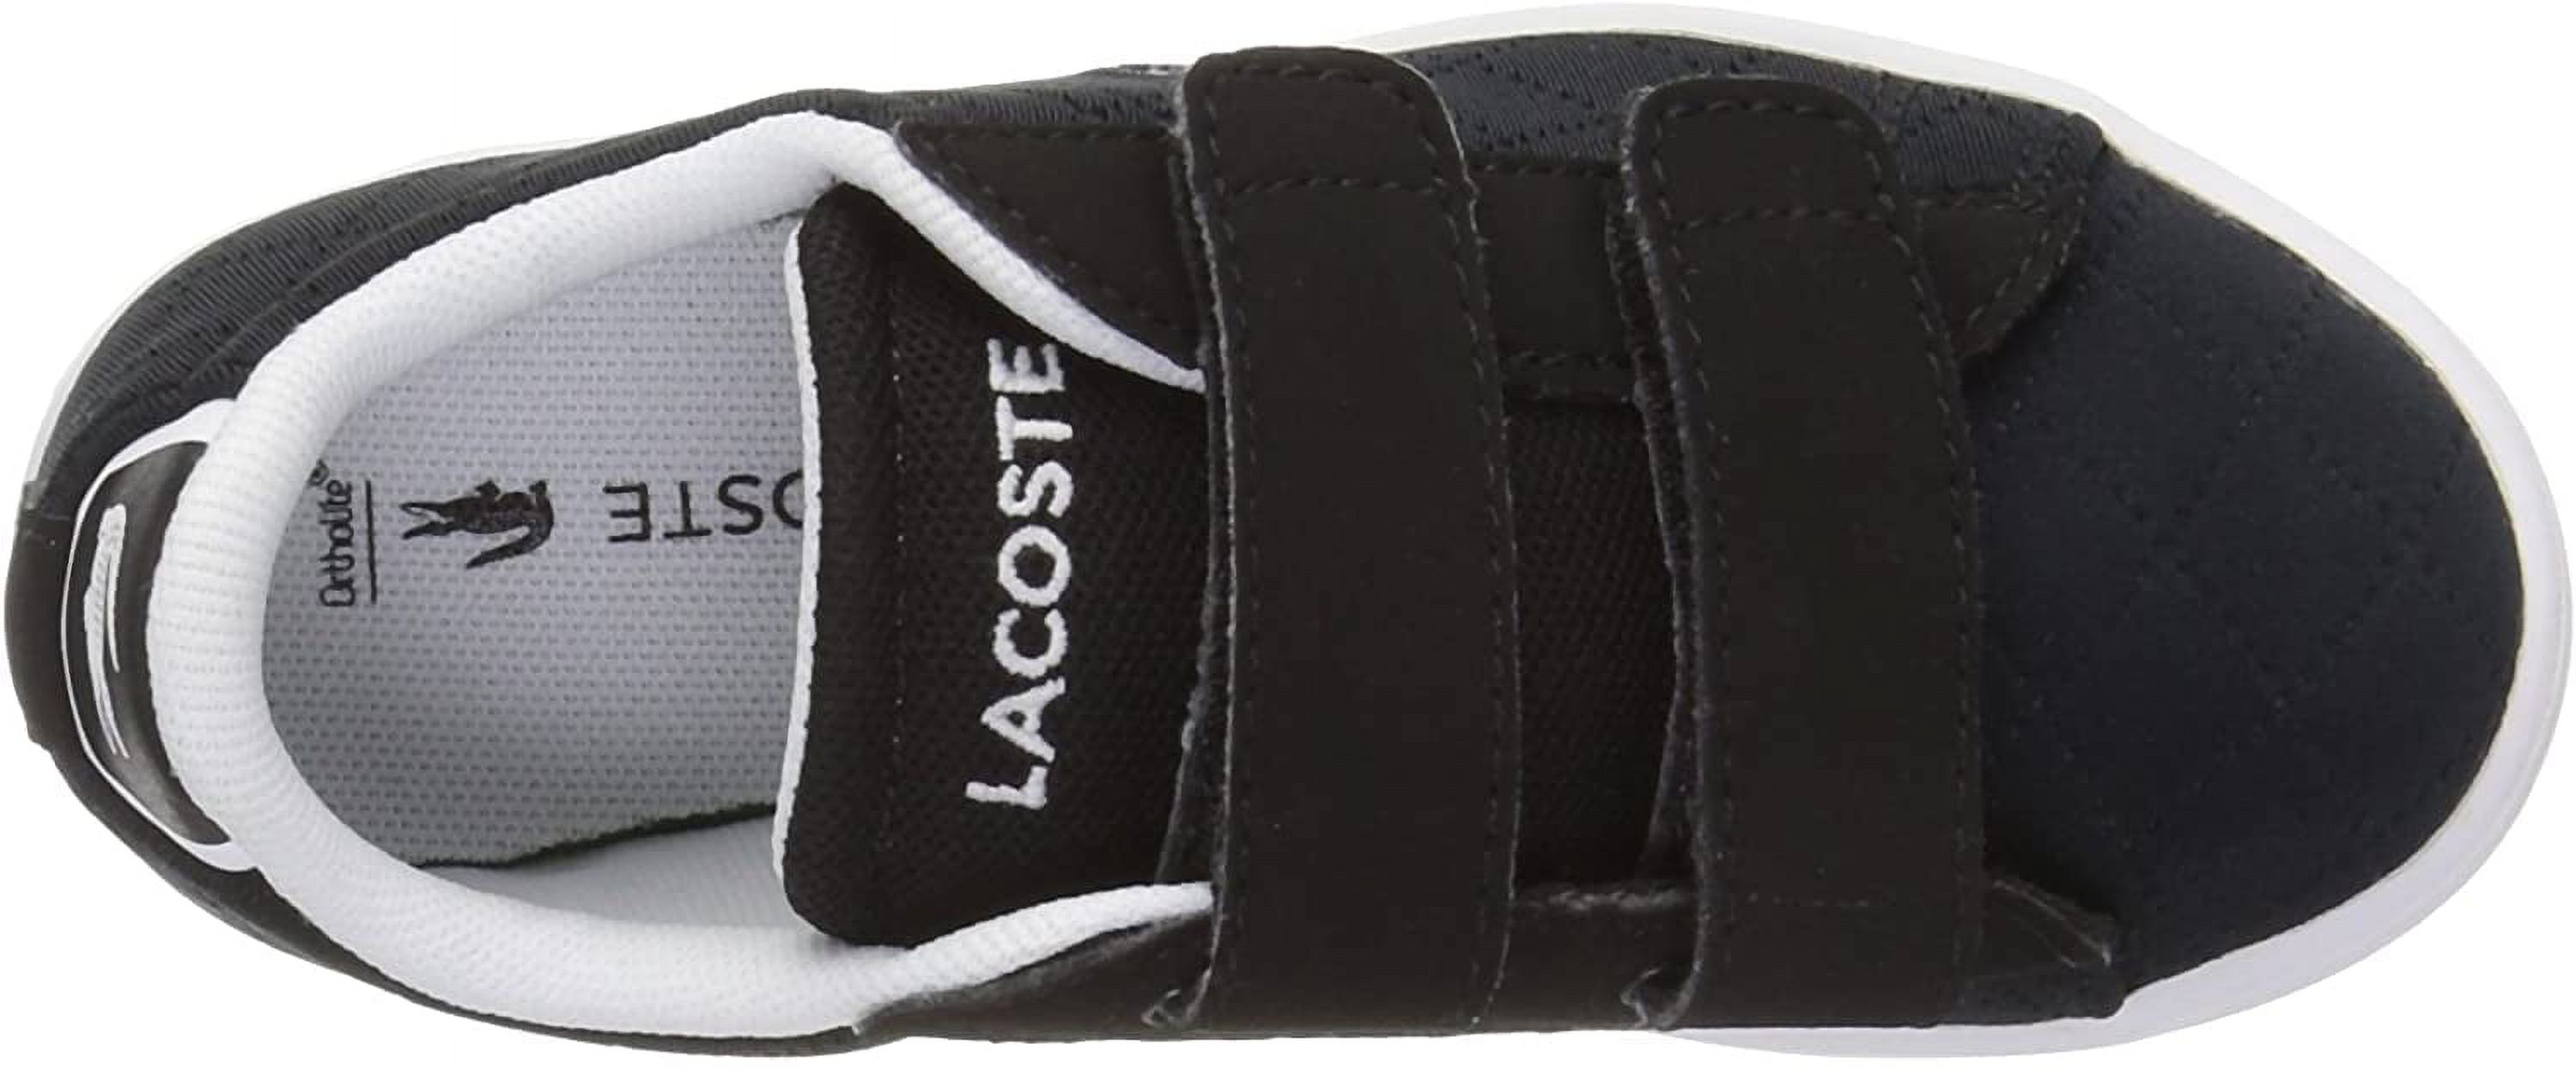 Lacoste Toddlers Carnaby Evo 317 3 Spi Casual Shoe Sneaker, 2 Color Options - image 5 of 8